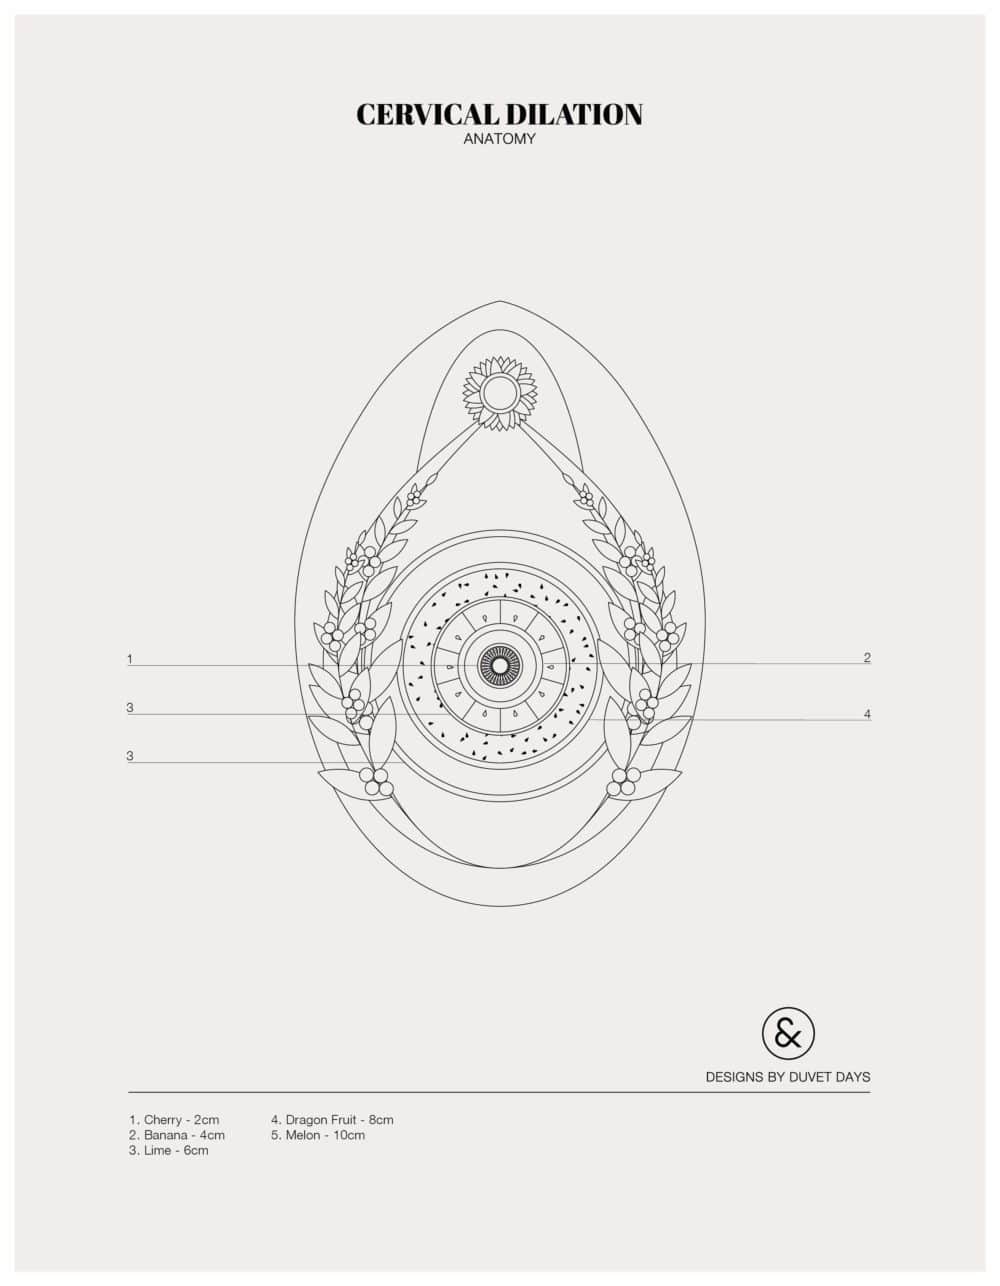 Designs By Duvet Days_8.5x11_Cervical Dilation_Colouring Sheet_Preview